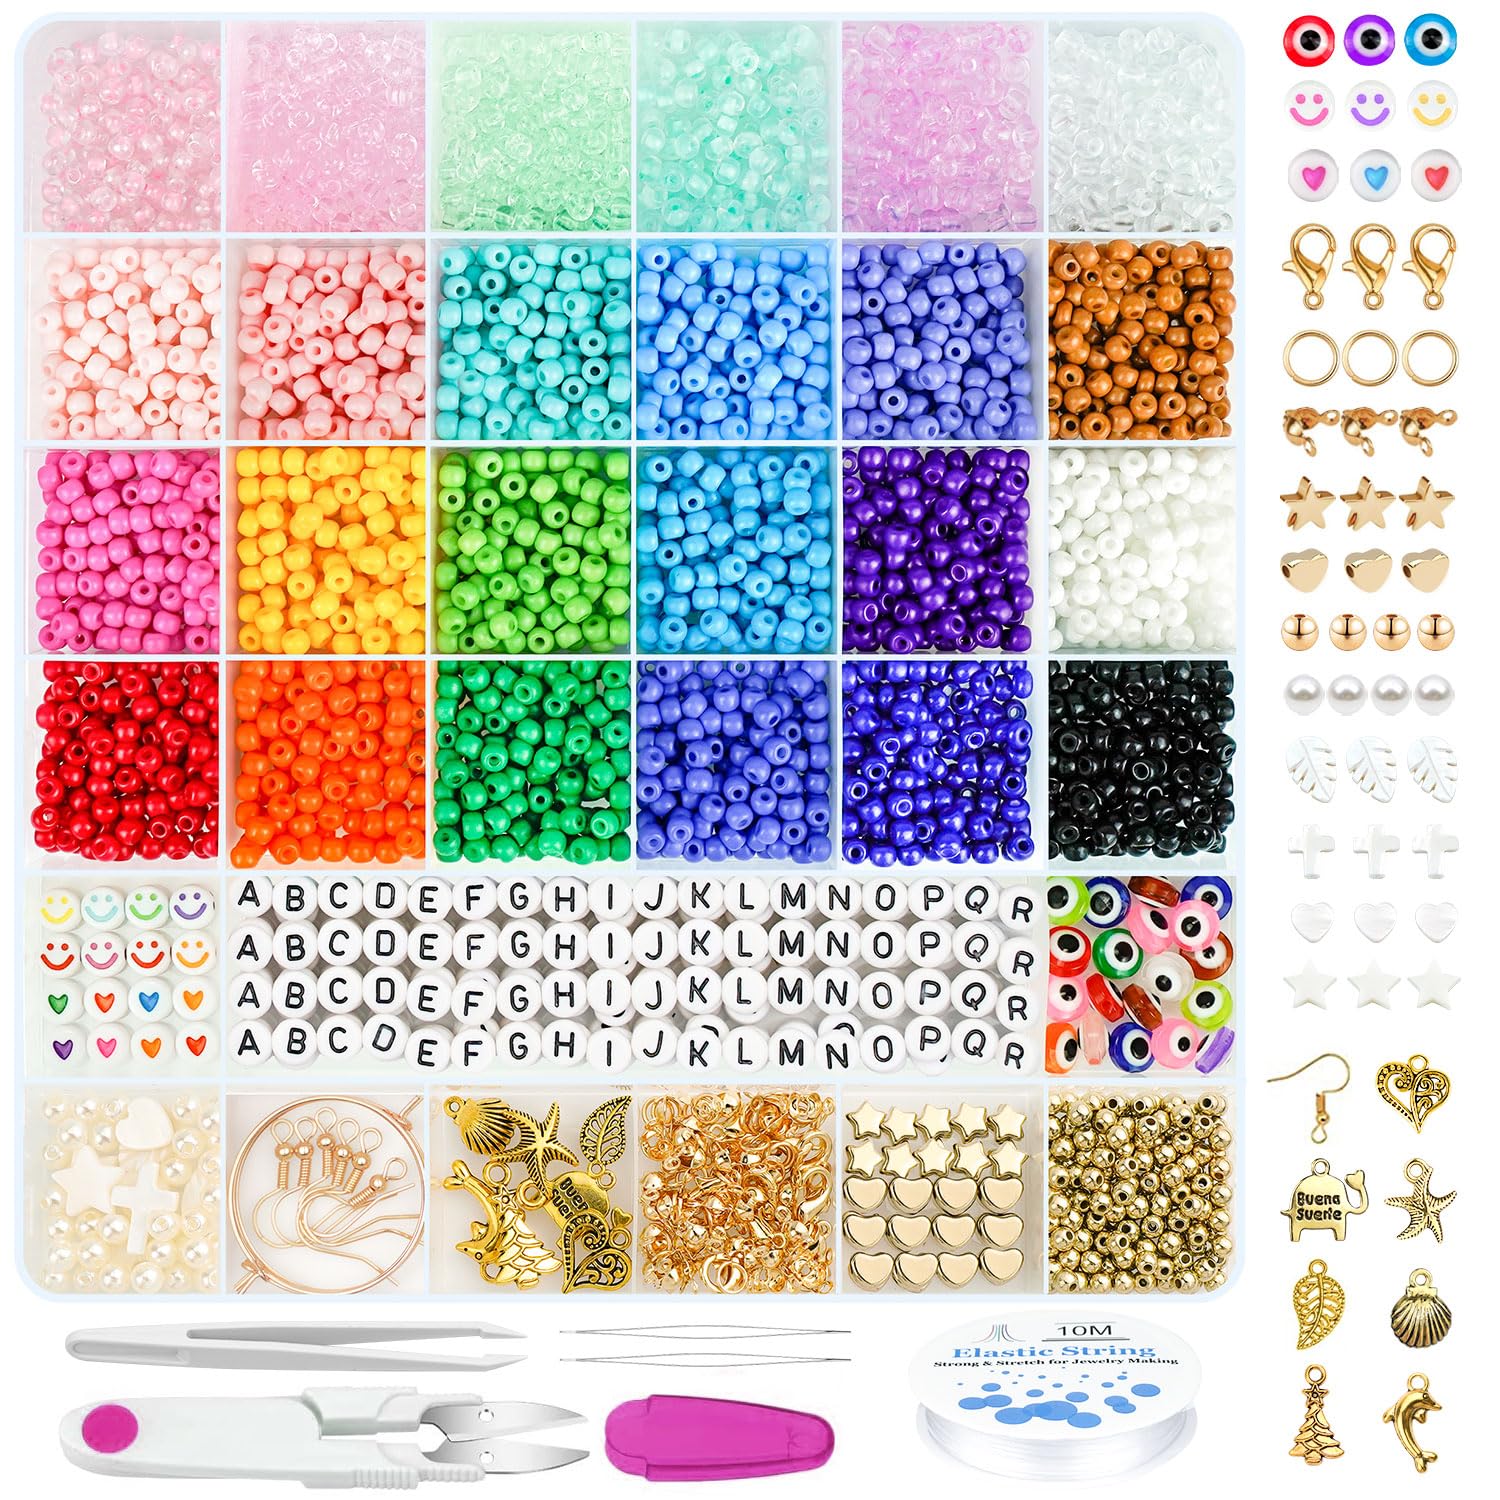 Gionlion 4000 Pcs 4mm Glass Seed Beads for Jewelry Making,24 Colors Seed Beads Friendship Preppy Bracelet Making Kit with Letter Beads Charms Kit and Elastic Strings